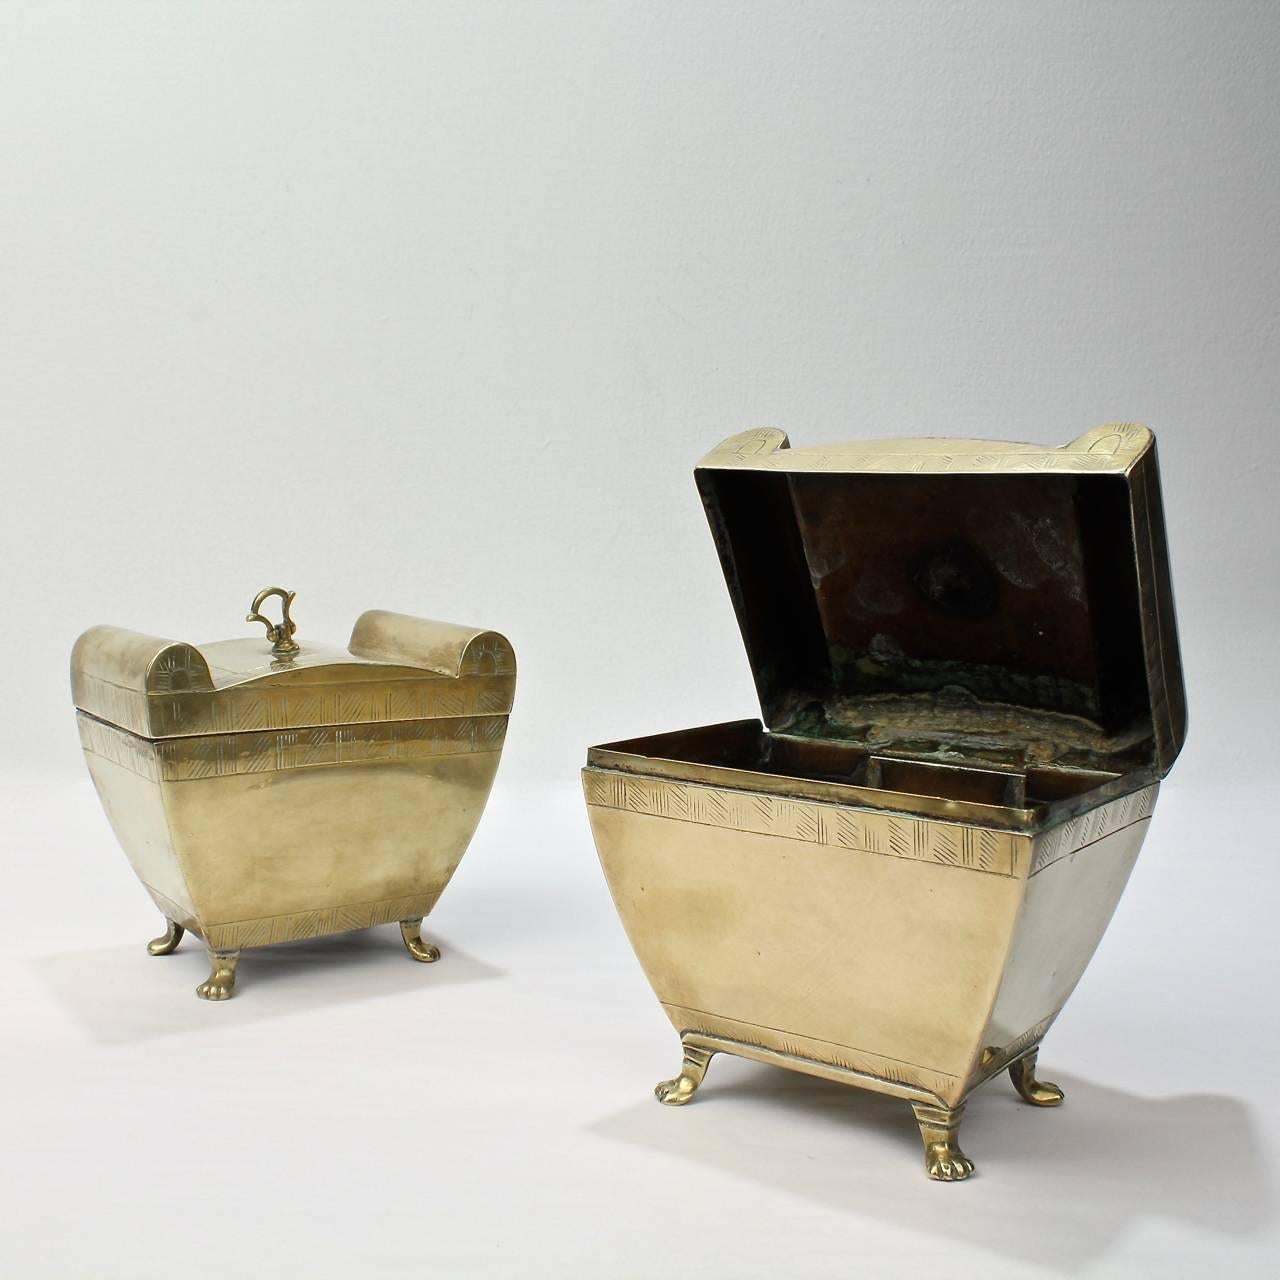 Matched Pair of English Colonial or Anglo-Indian Brass Tea Caddies 2